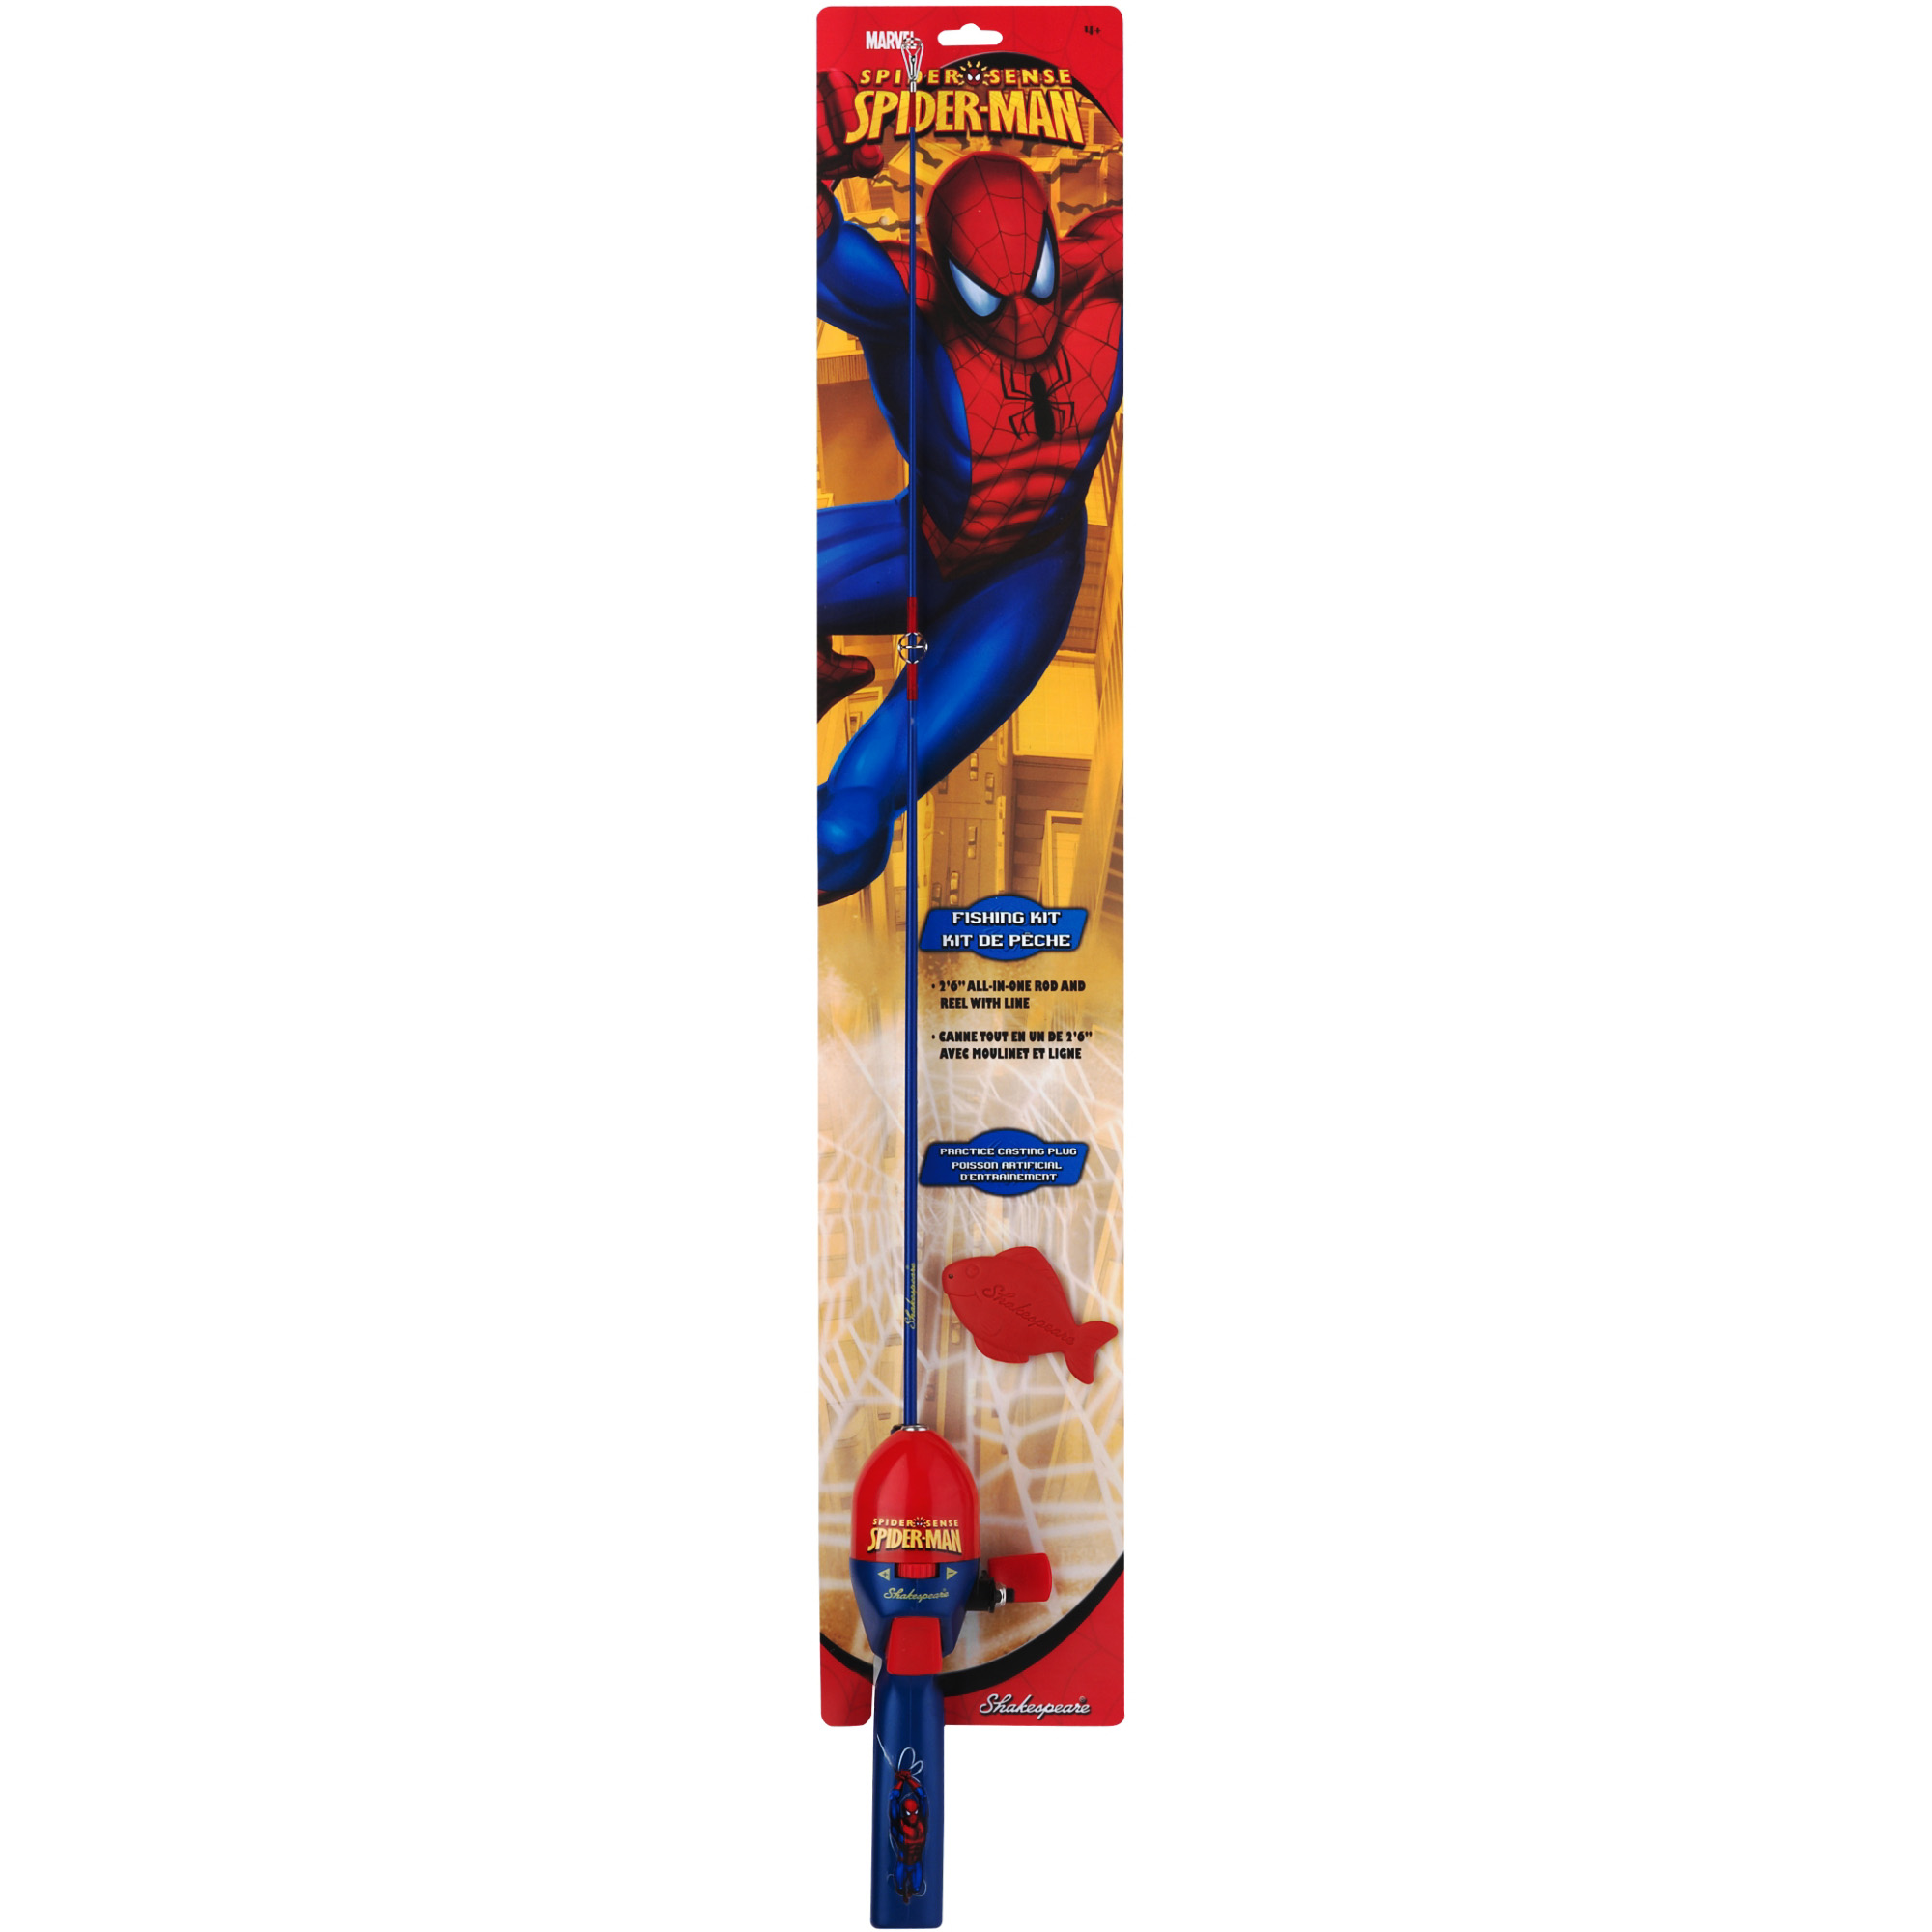 Shakespeare Spider-Man Fishing Kit with 2 Ft. 6 In. All-In-One Casting Kit - image 2 of 3